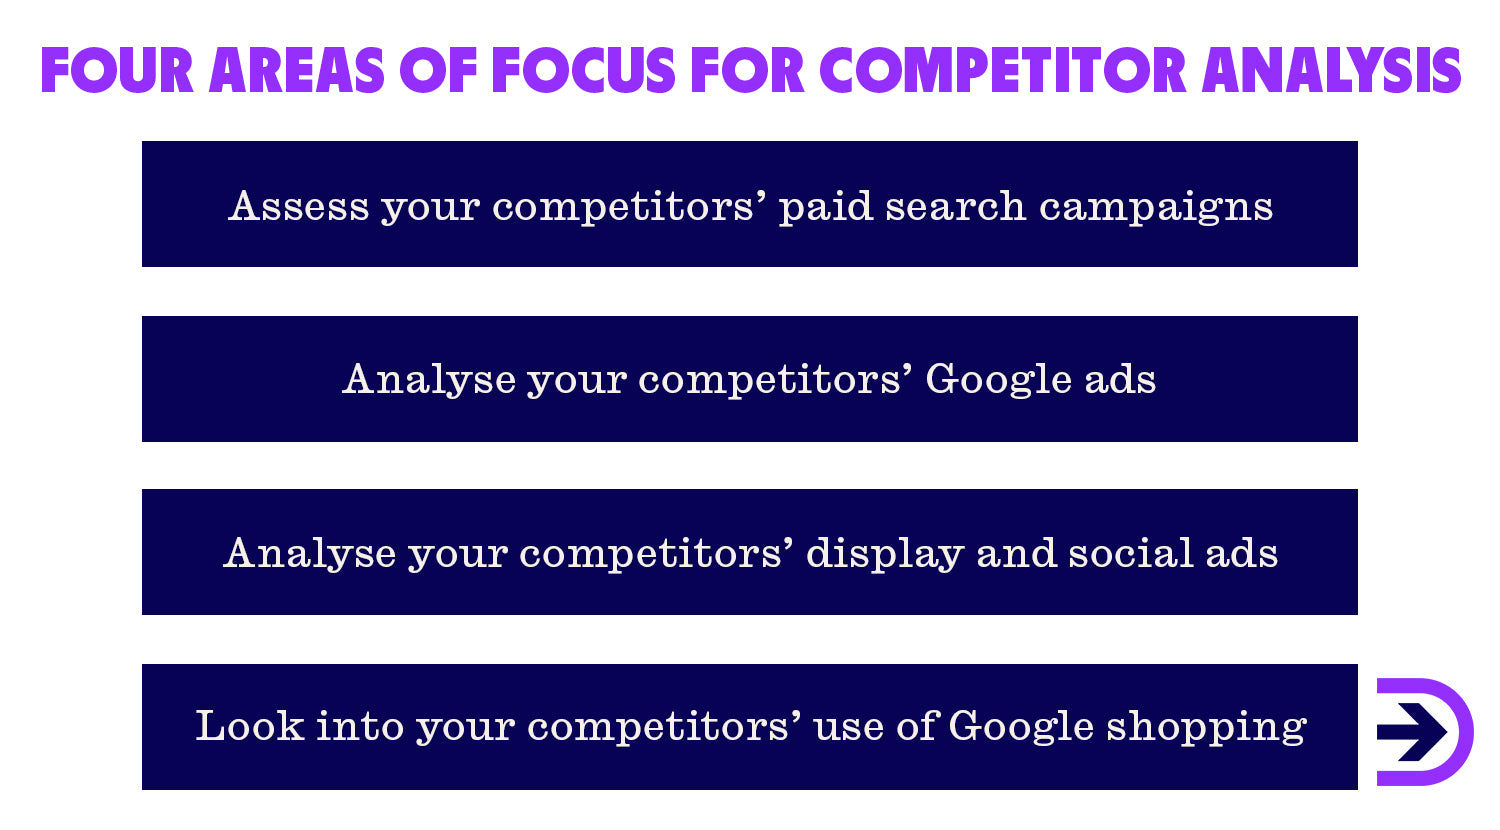 When looking into your competitors' marketing, assess their paid search campaigns and Google ads.